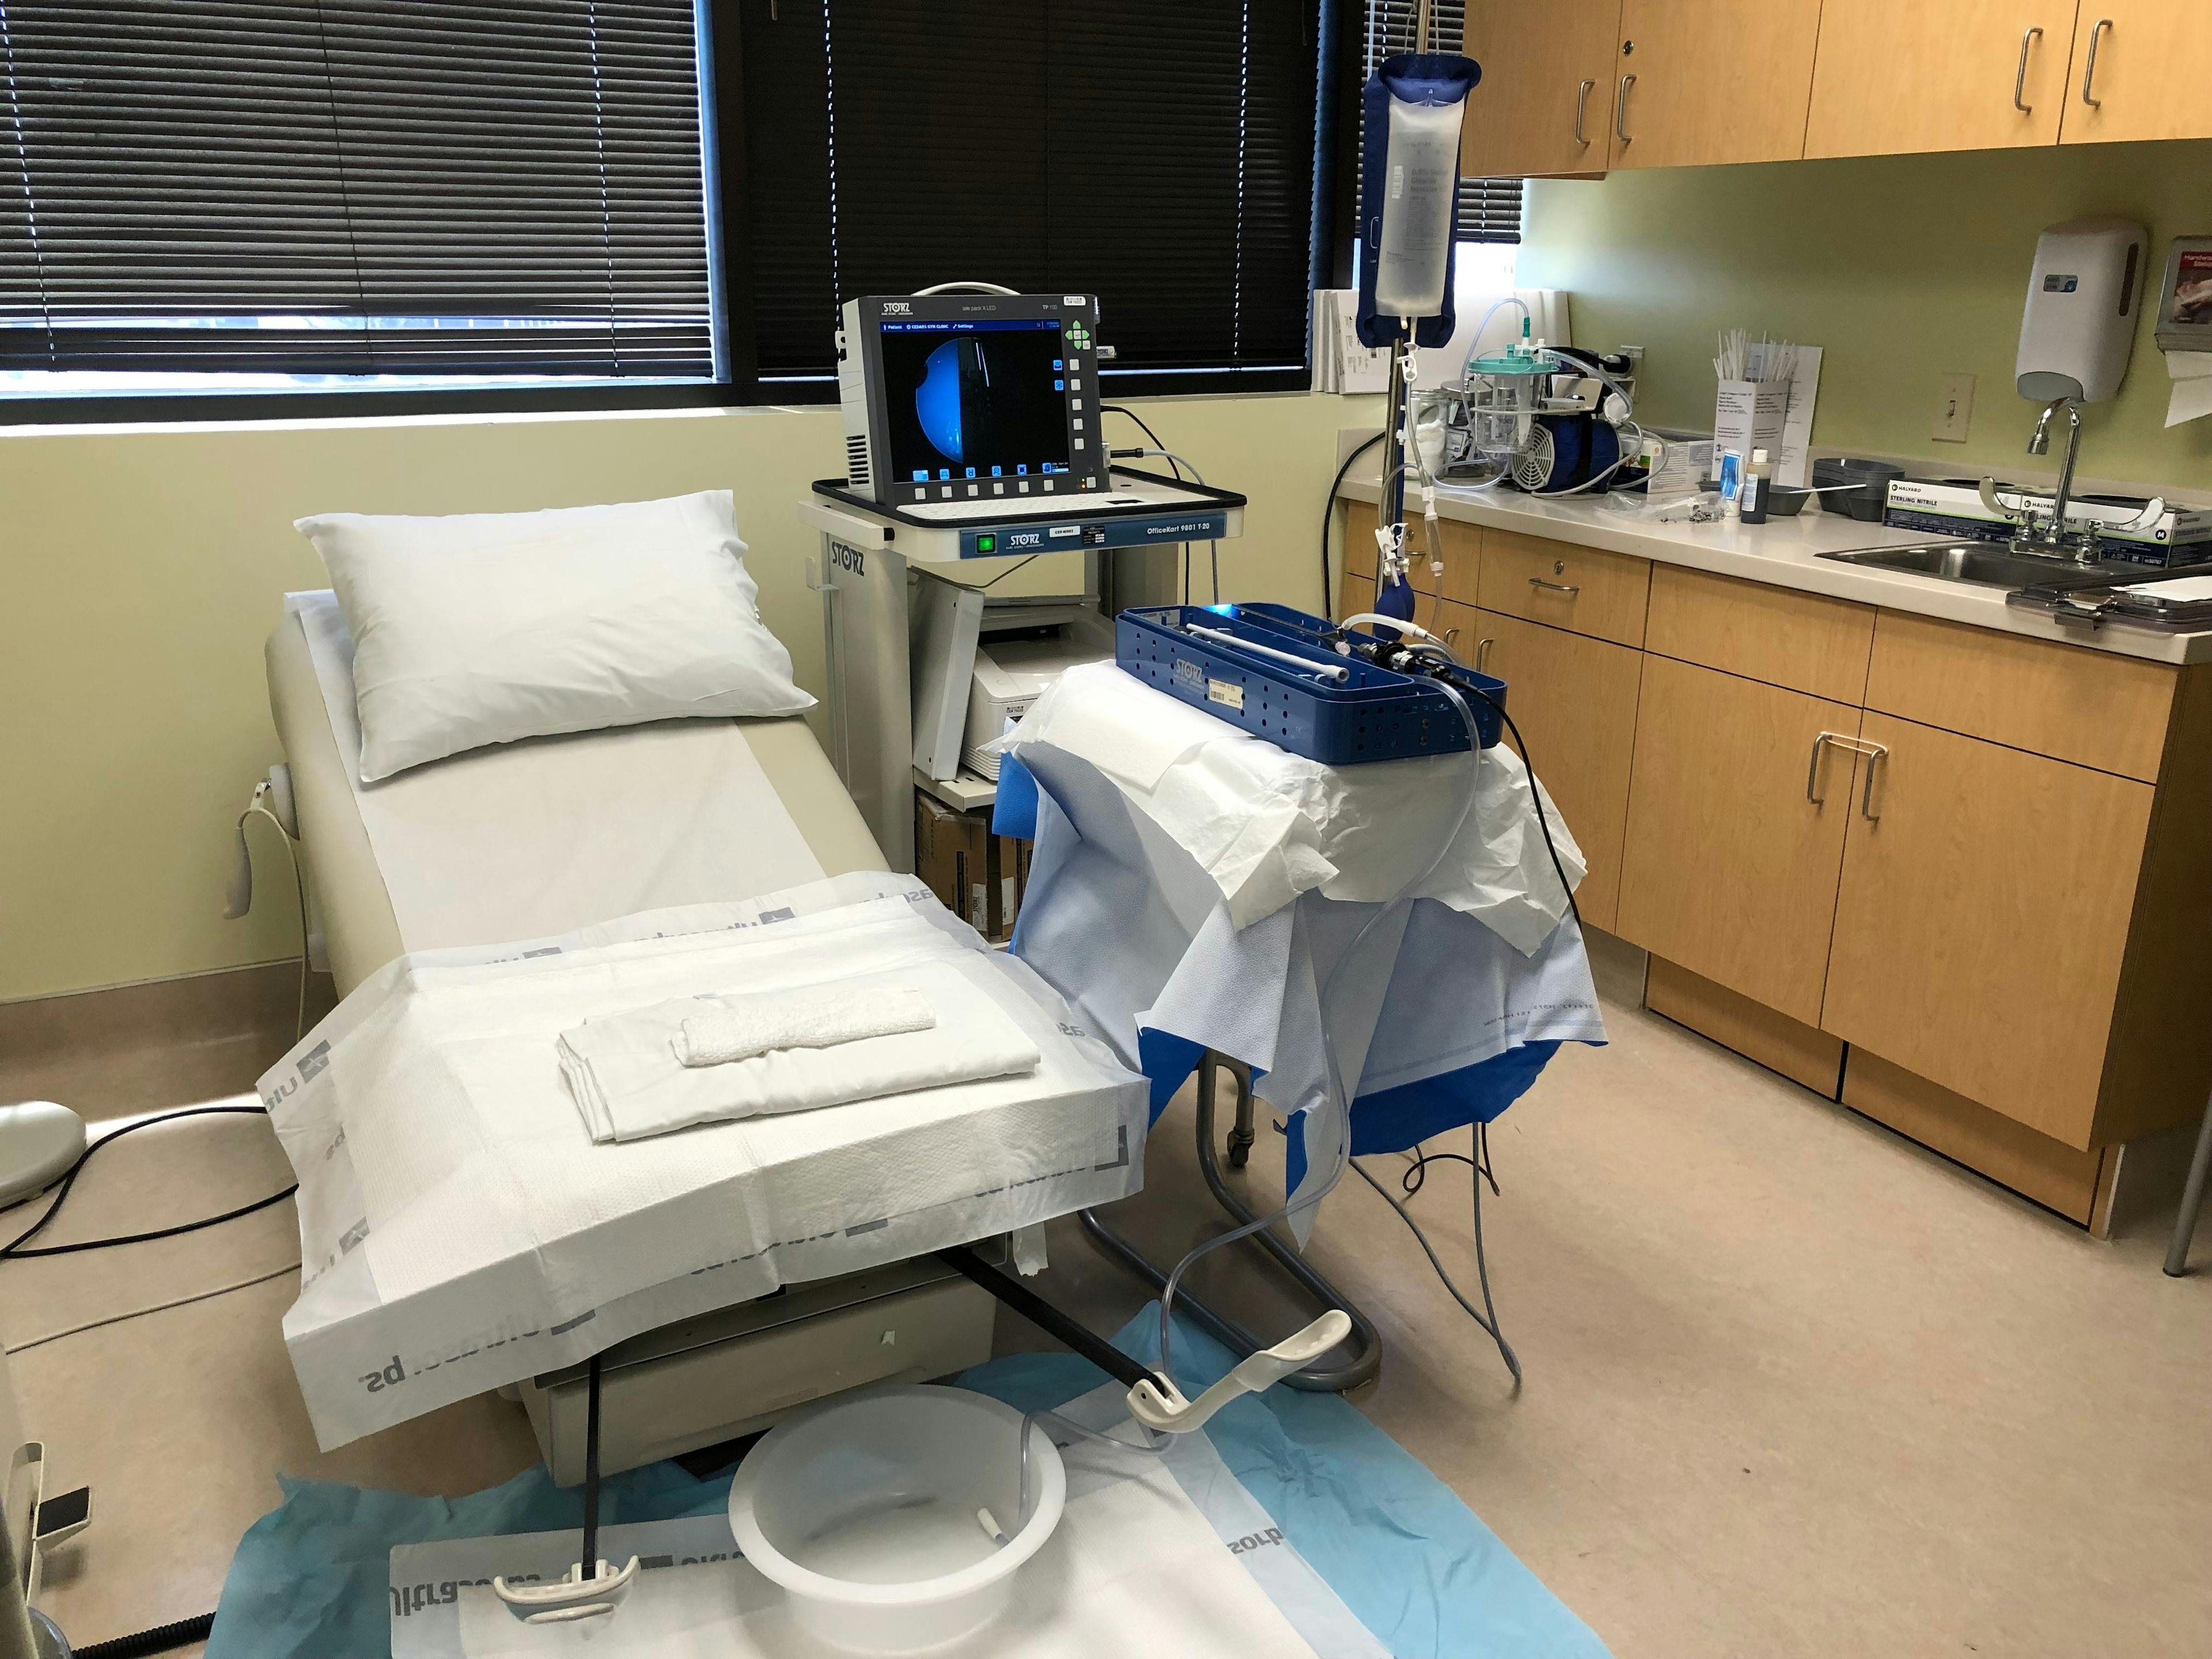 Figure 1. This exam room setup shows all the necessary components for office hysteroscopy, including a bed with stirrups, video system with camera and light cord, sterilized hysteroscope on a mayo stand with infl ow coming from a pressure bag on an IV pole and outflow to gravity in a basin, and a tabletop suction for tissue extraction devices.